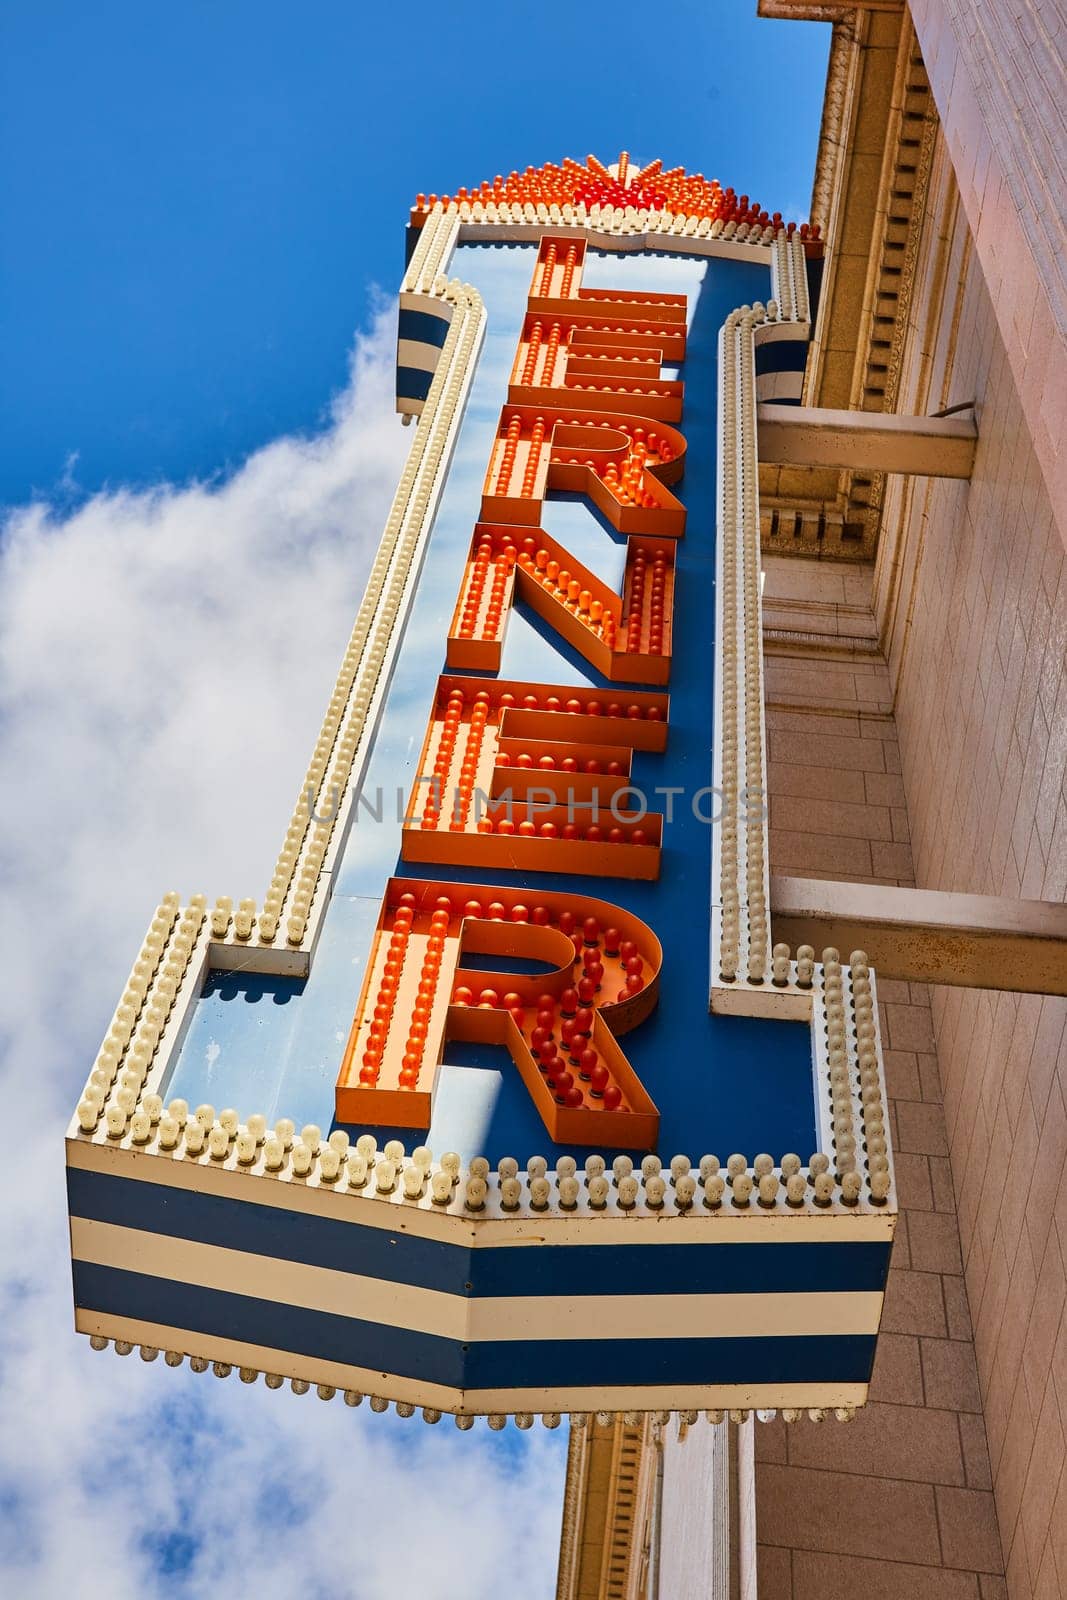 Vintage downtown movie theatre marquee sign in Elkhart, Indiana, radiating the golden age of Hollywood nostalgia against a sunny blue sky backdrop